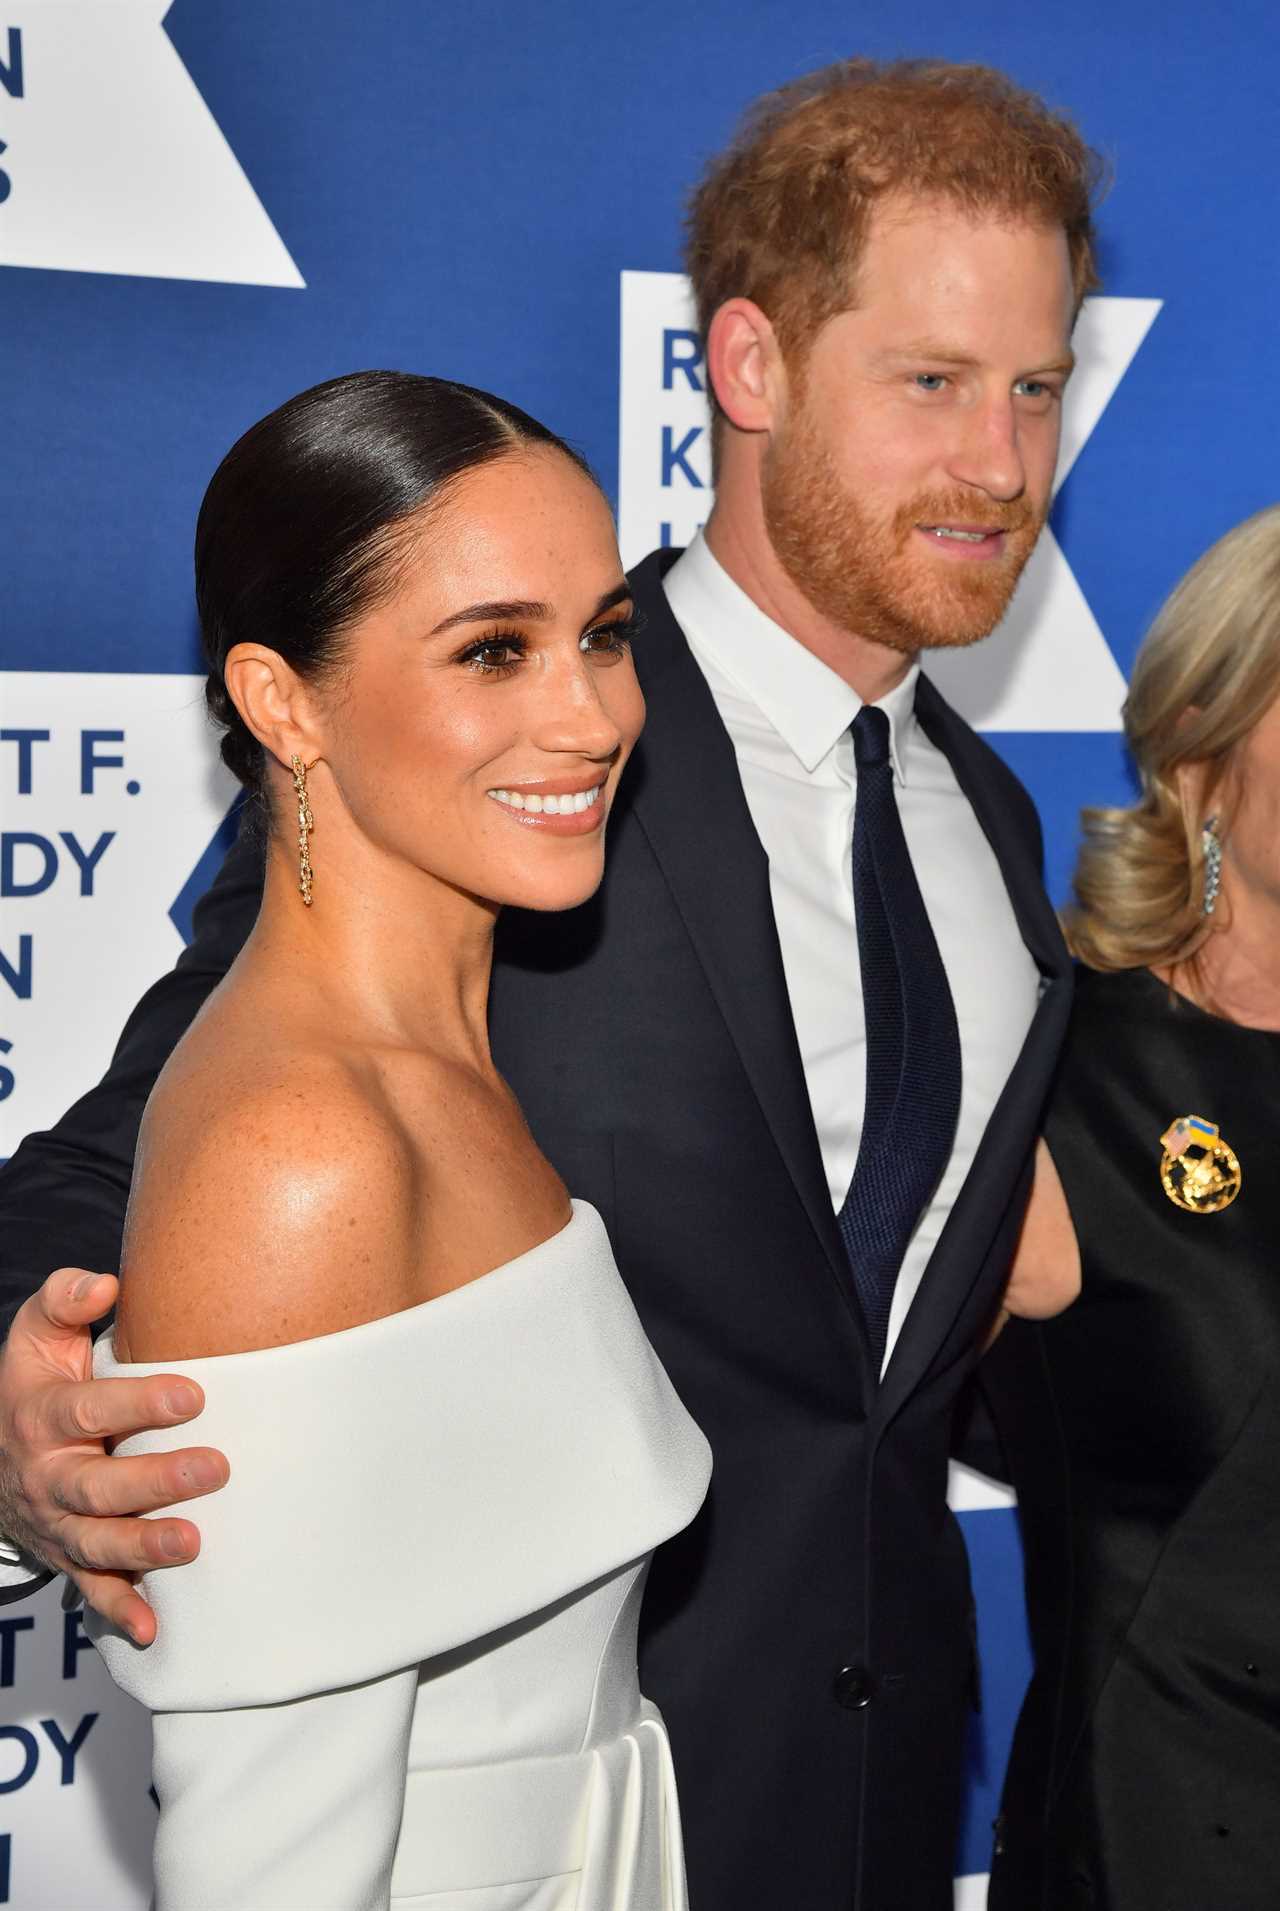 Prince Harry & Meghan Markle ‘still invited’ to King Charles’ coronation despite attacks on royals in Netflix docuseries